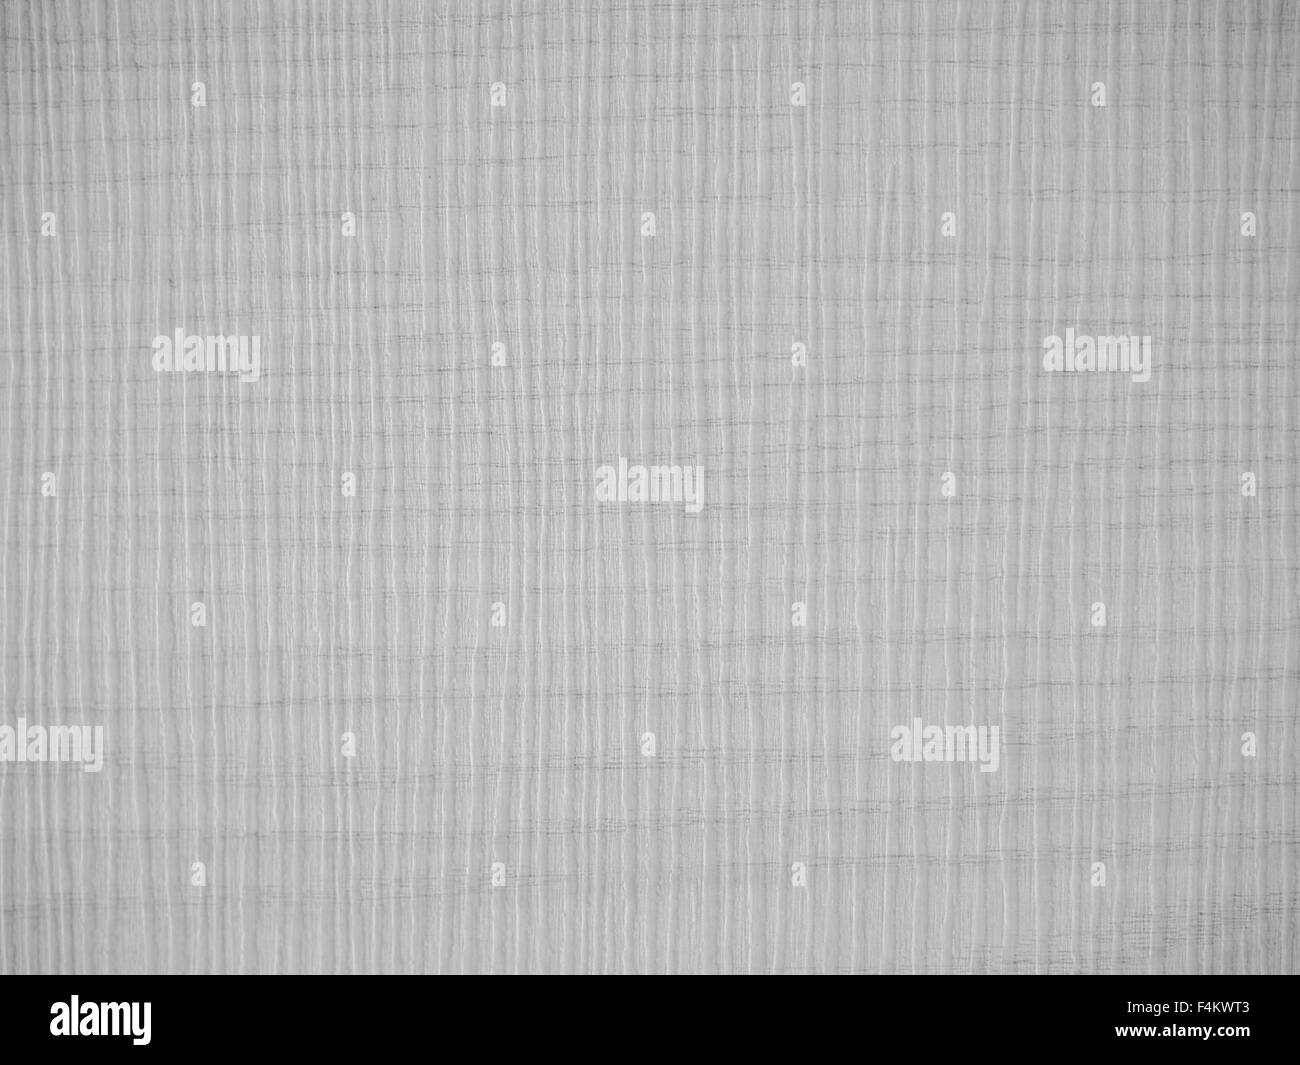 wallpaper of vertical stripes pale gray color Stock Photo